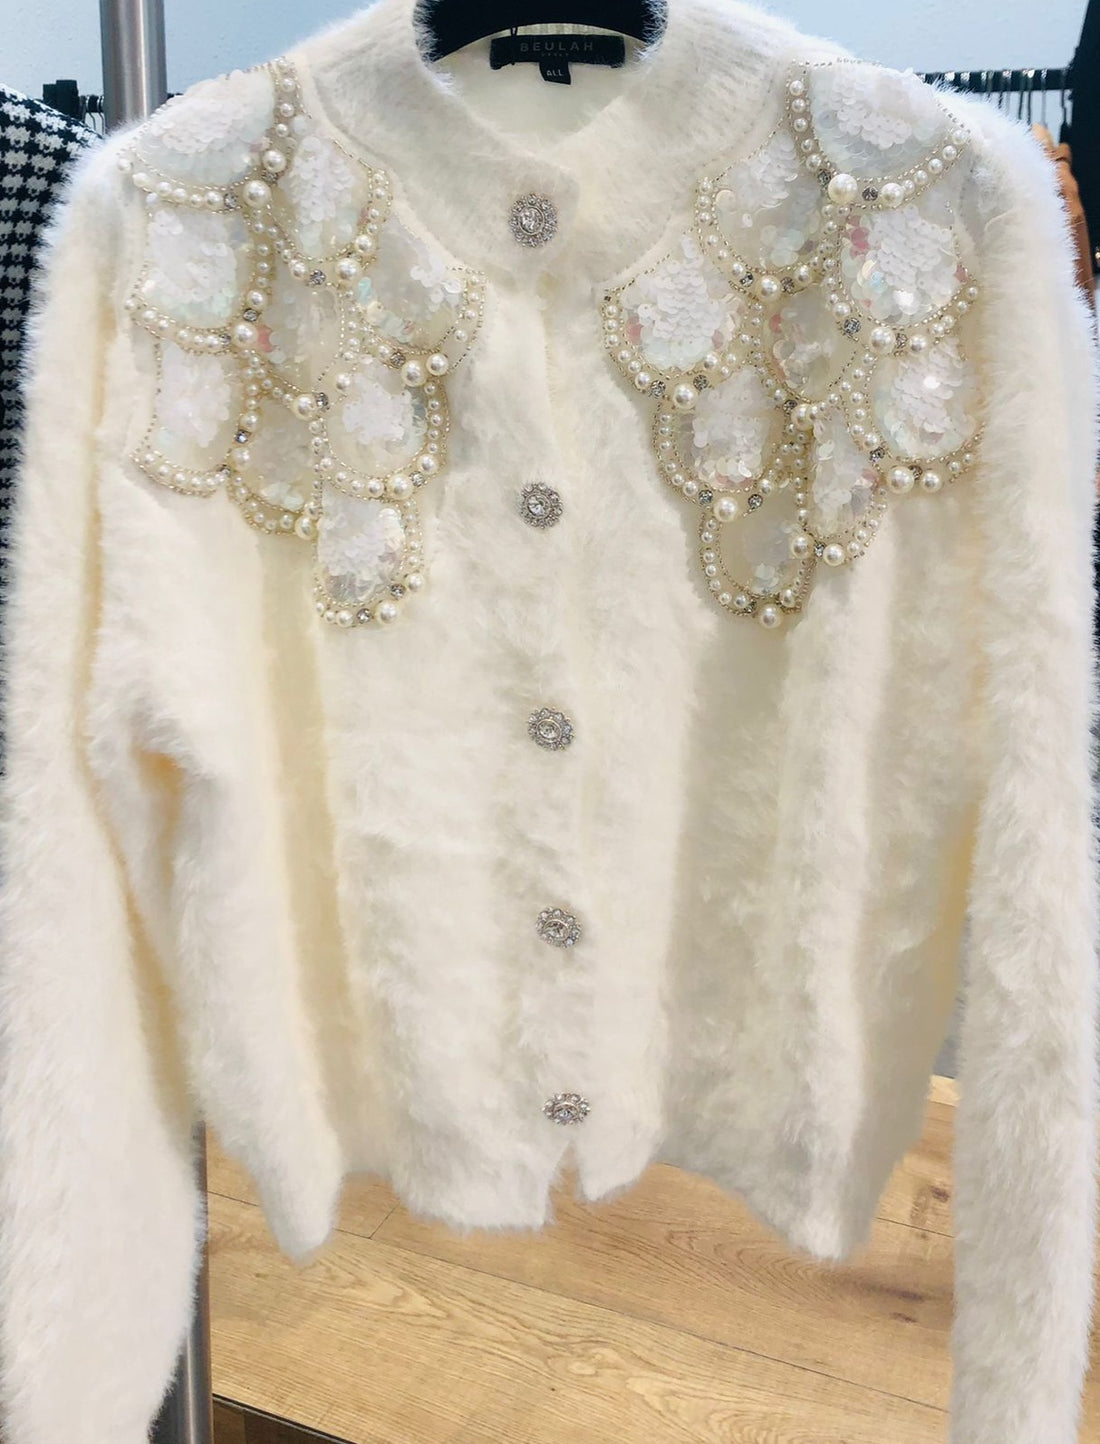 The Snowy Sweater With Pearls